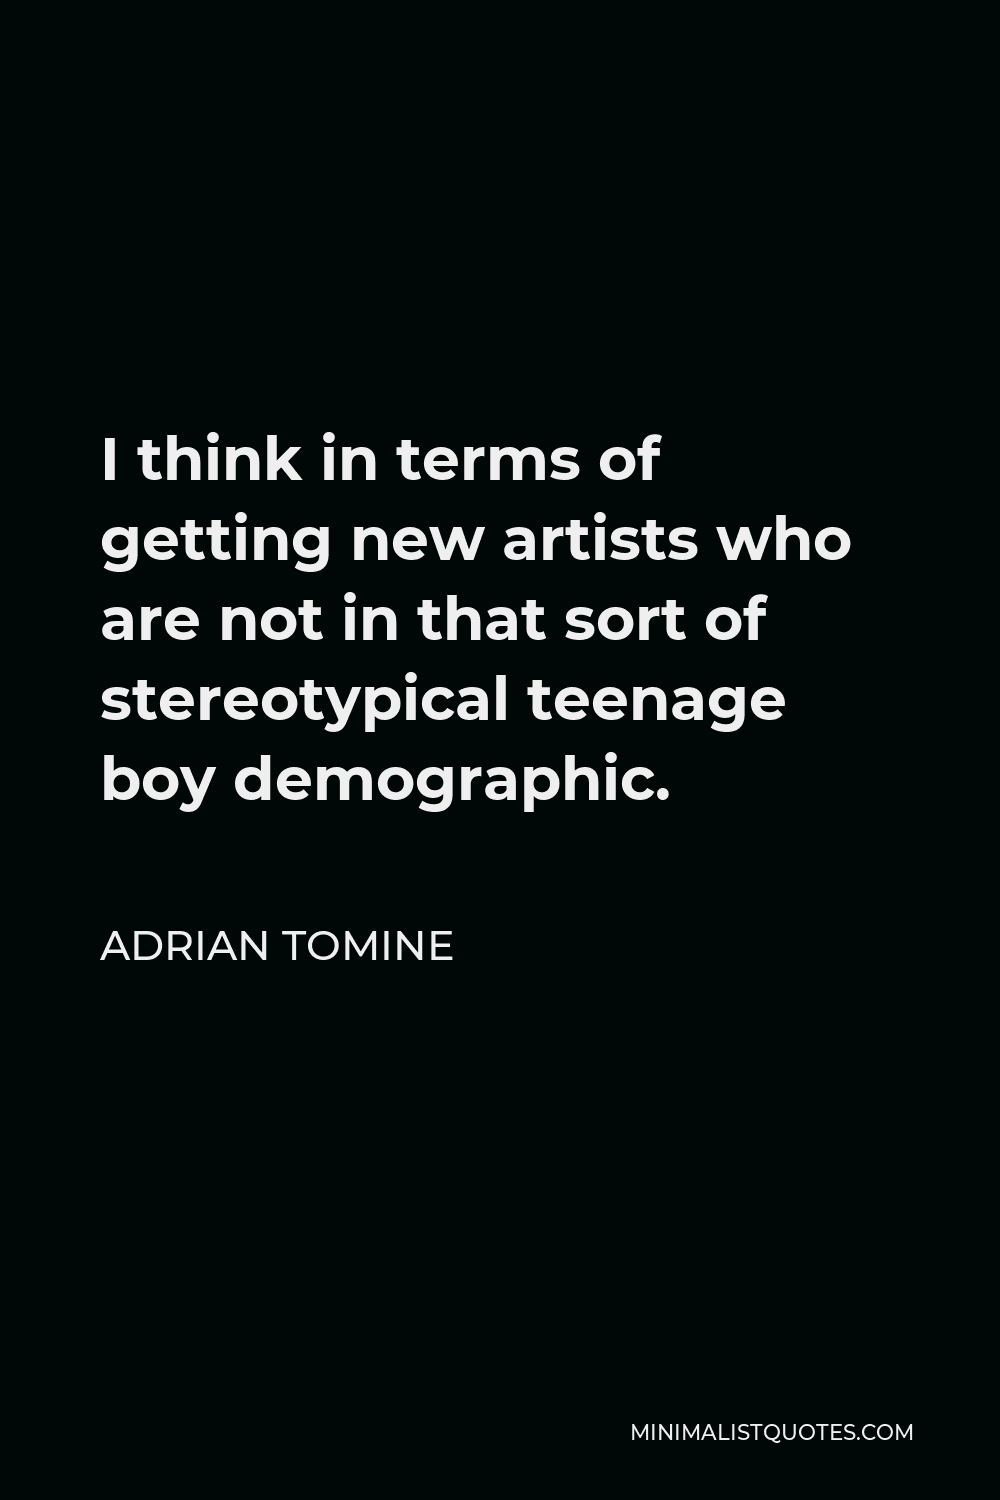 Adrian Tomine Quote - I think in terms of getting new artists who are not in that sort of stereotypical teenage boy demographic.